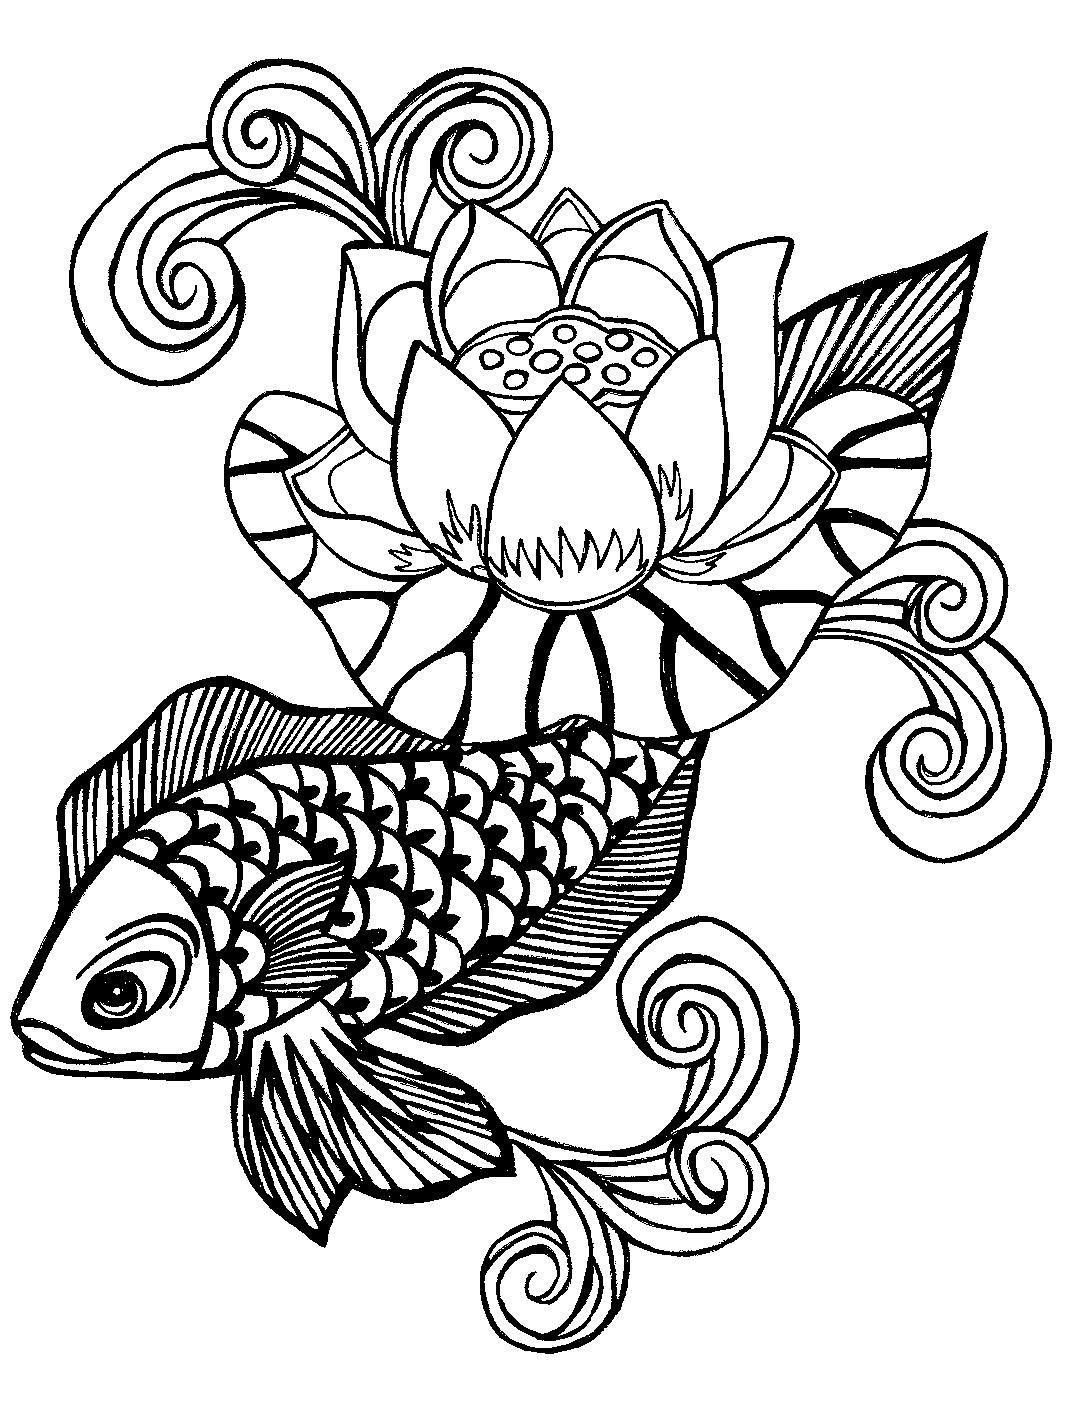 Lotus Flower Tattoo Drawing | Free download on ClipArtMag